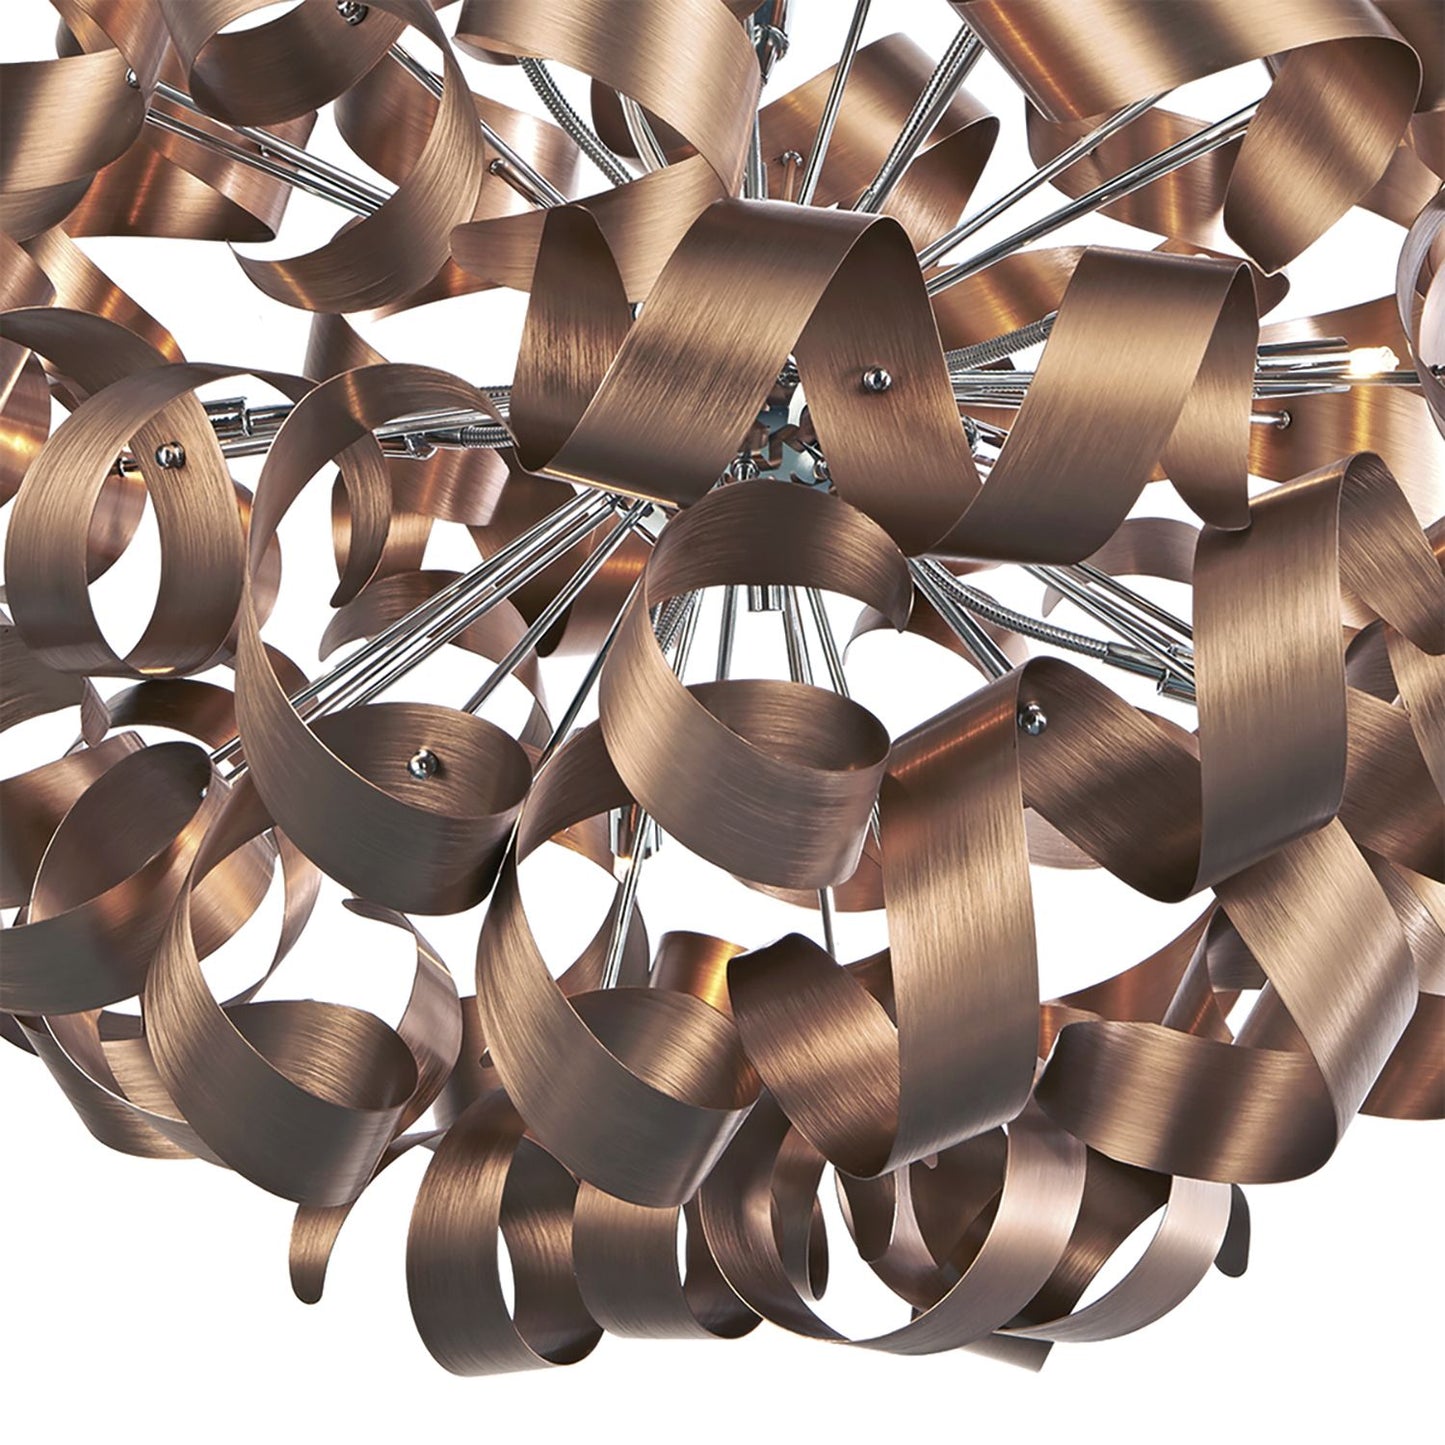 Becontree Brushed Copper 12 Light Pendant - ID 5221